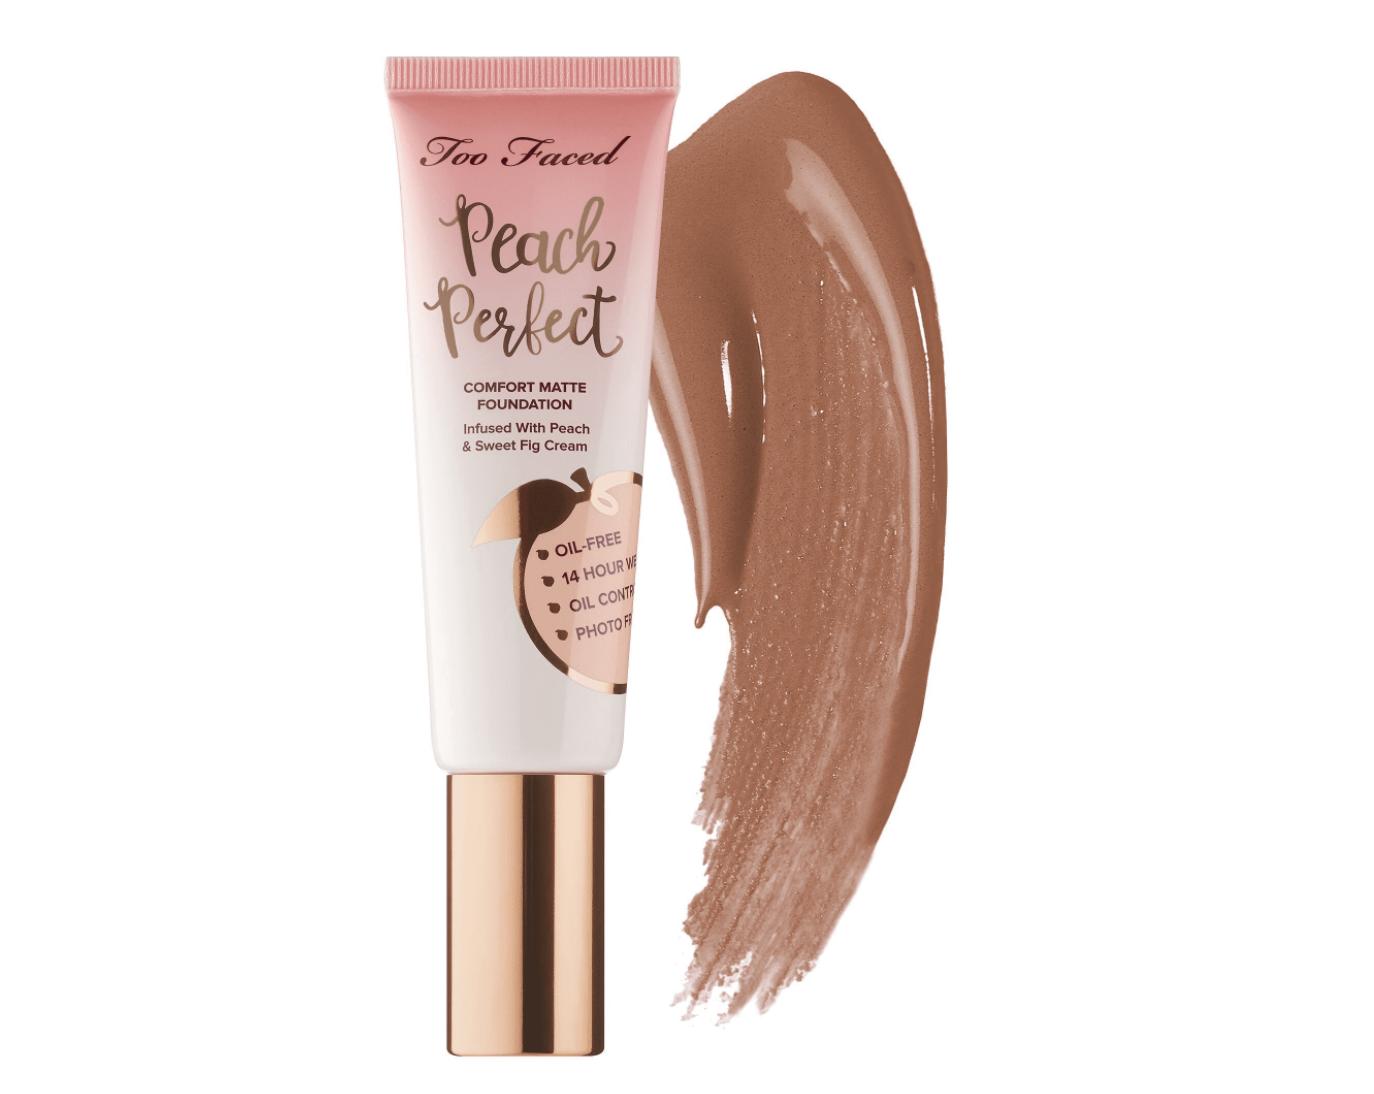 Too Faced Peach Perfect Comfort Matte Foundation Latte